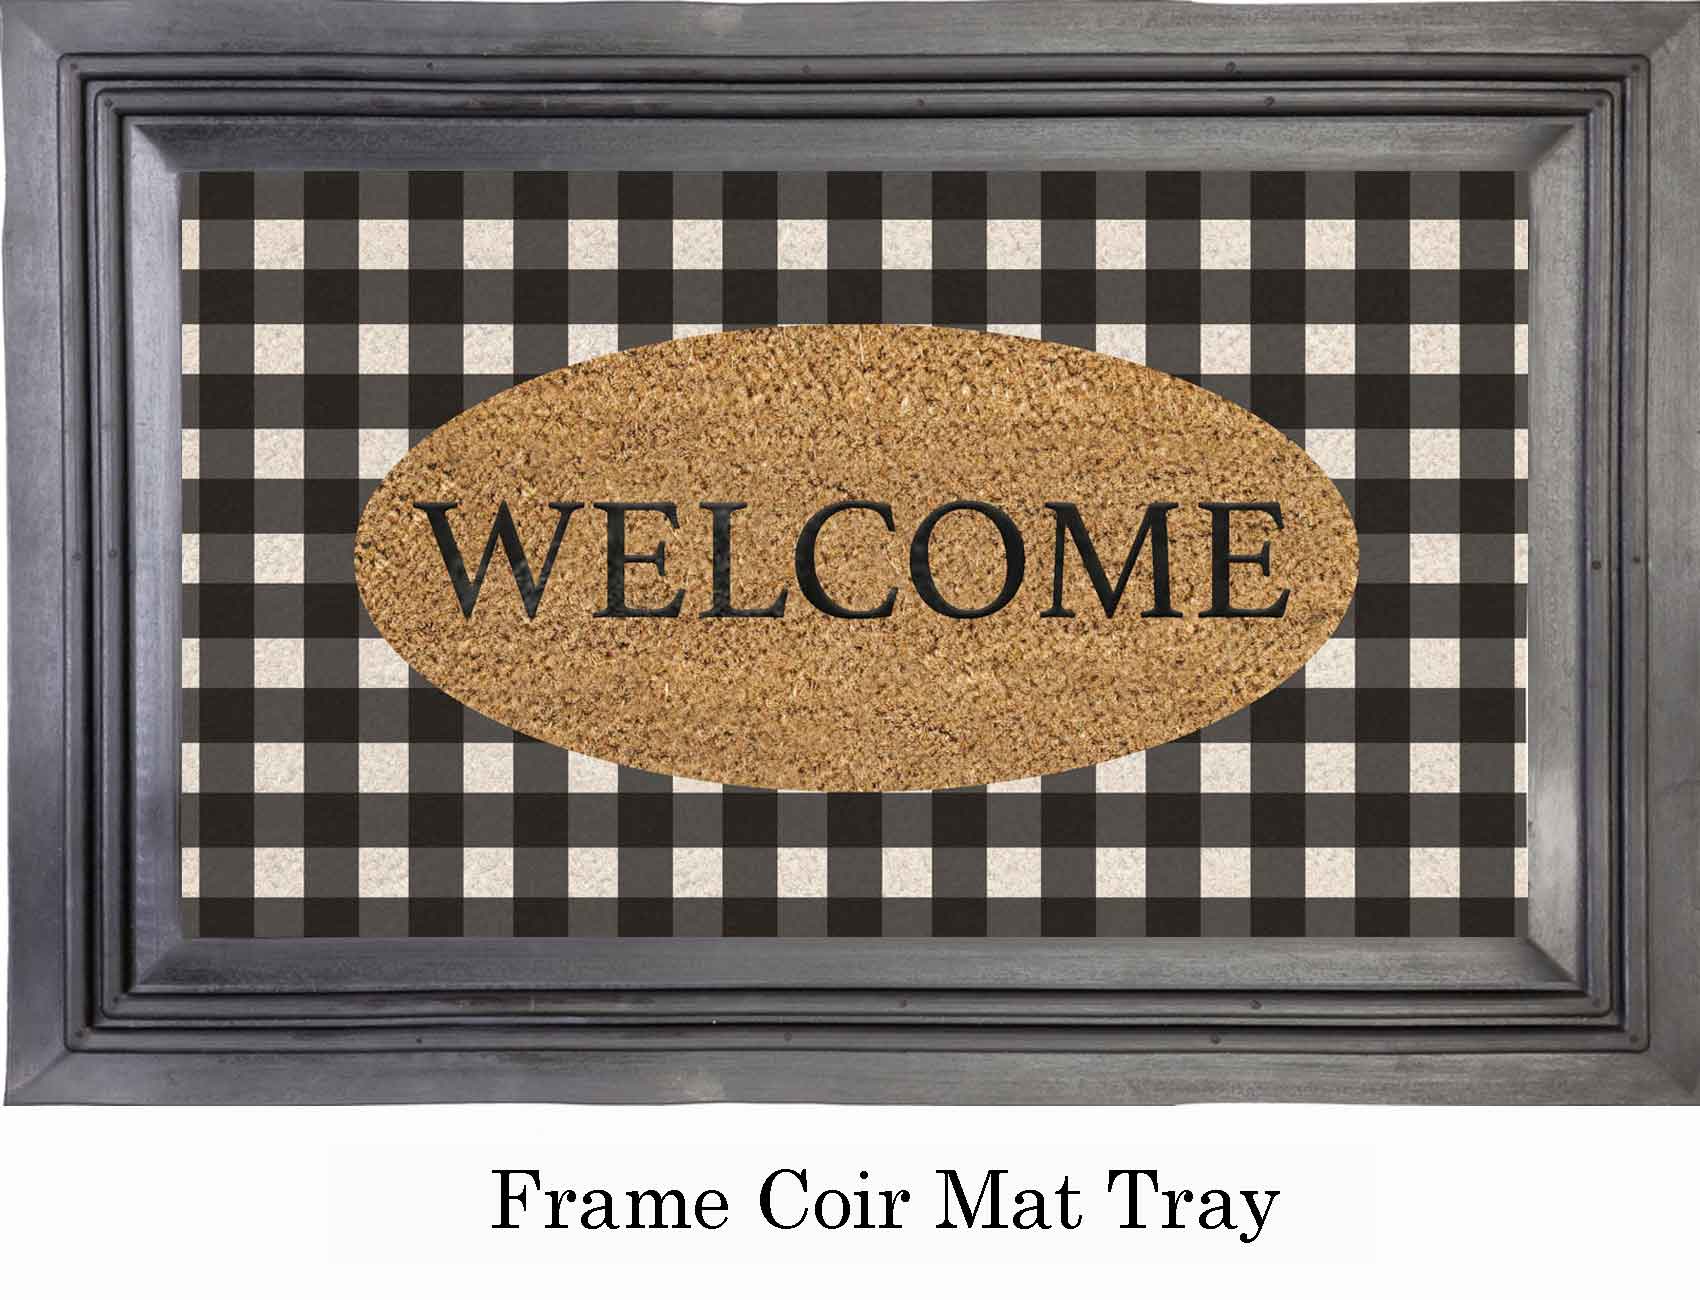 https://www.everythingdoormats.com/images/products/buffalo-check-welcome-coco-coir-doormat-in-black-frame-tray.jpg